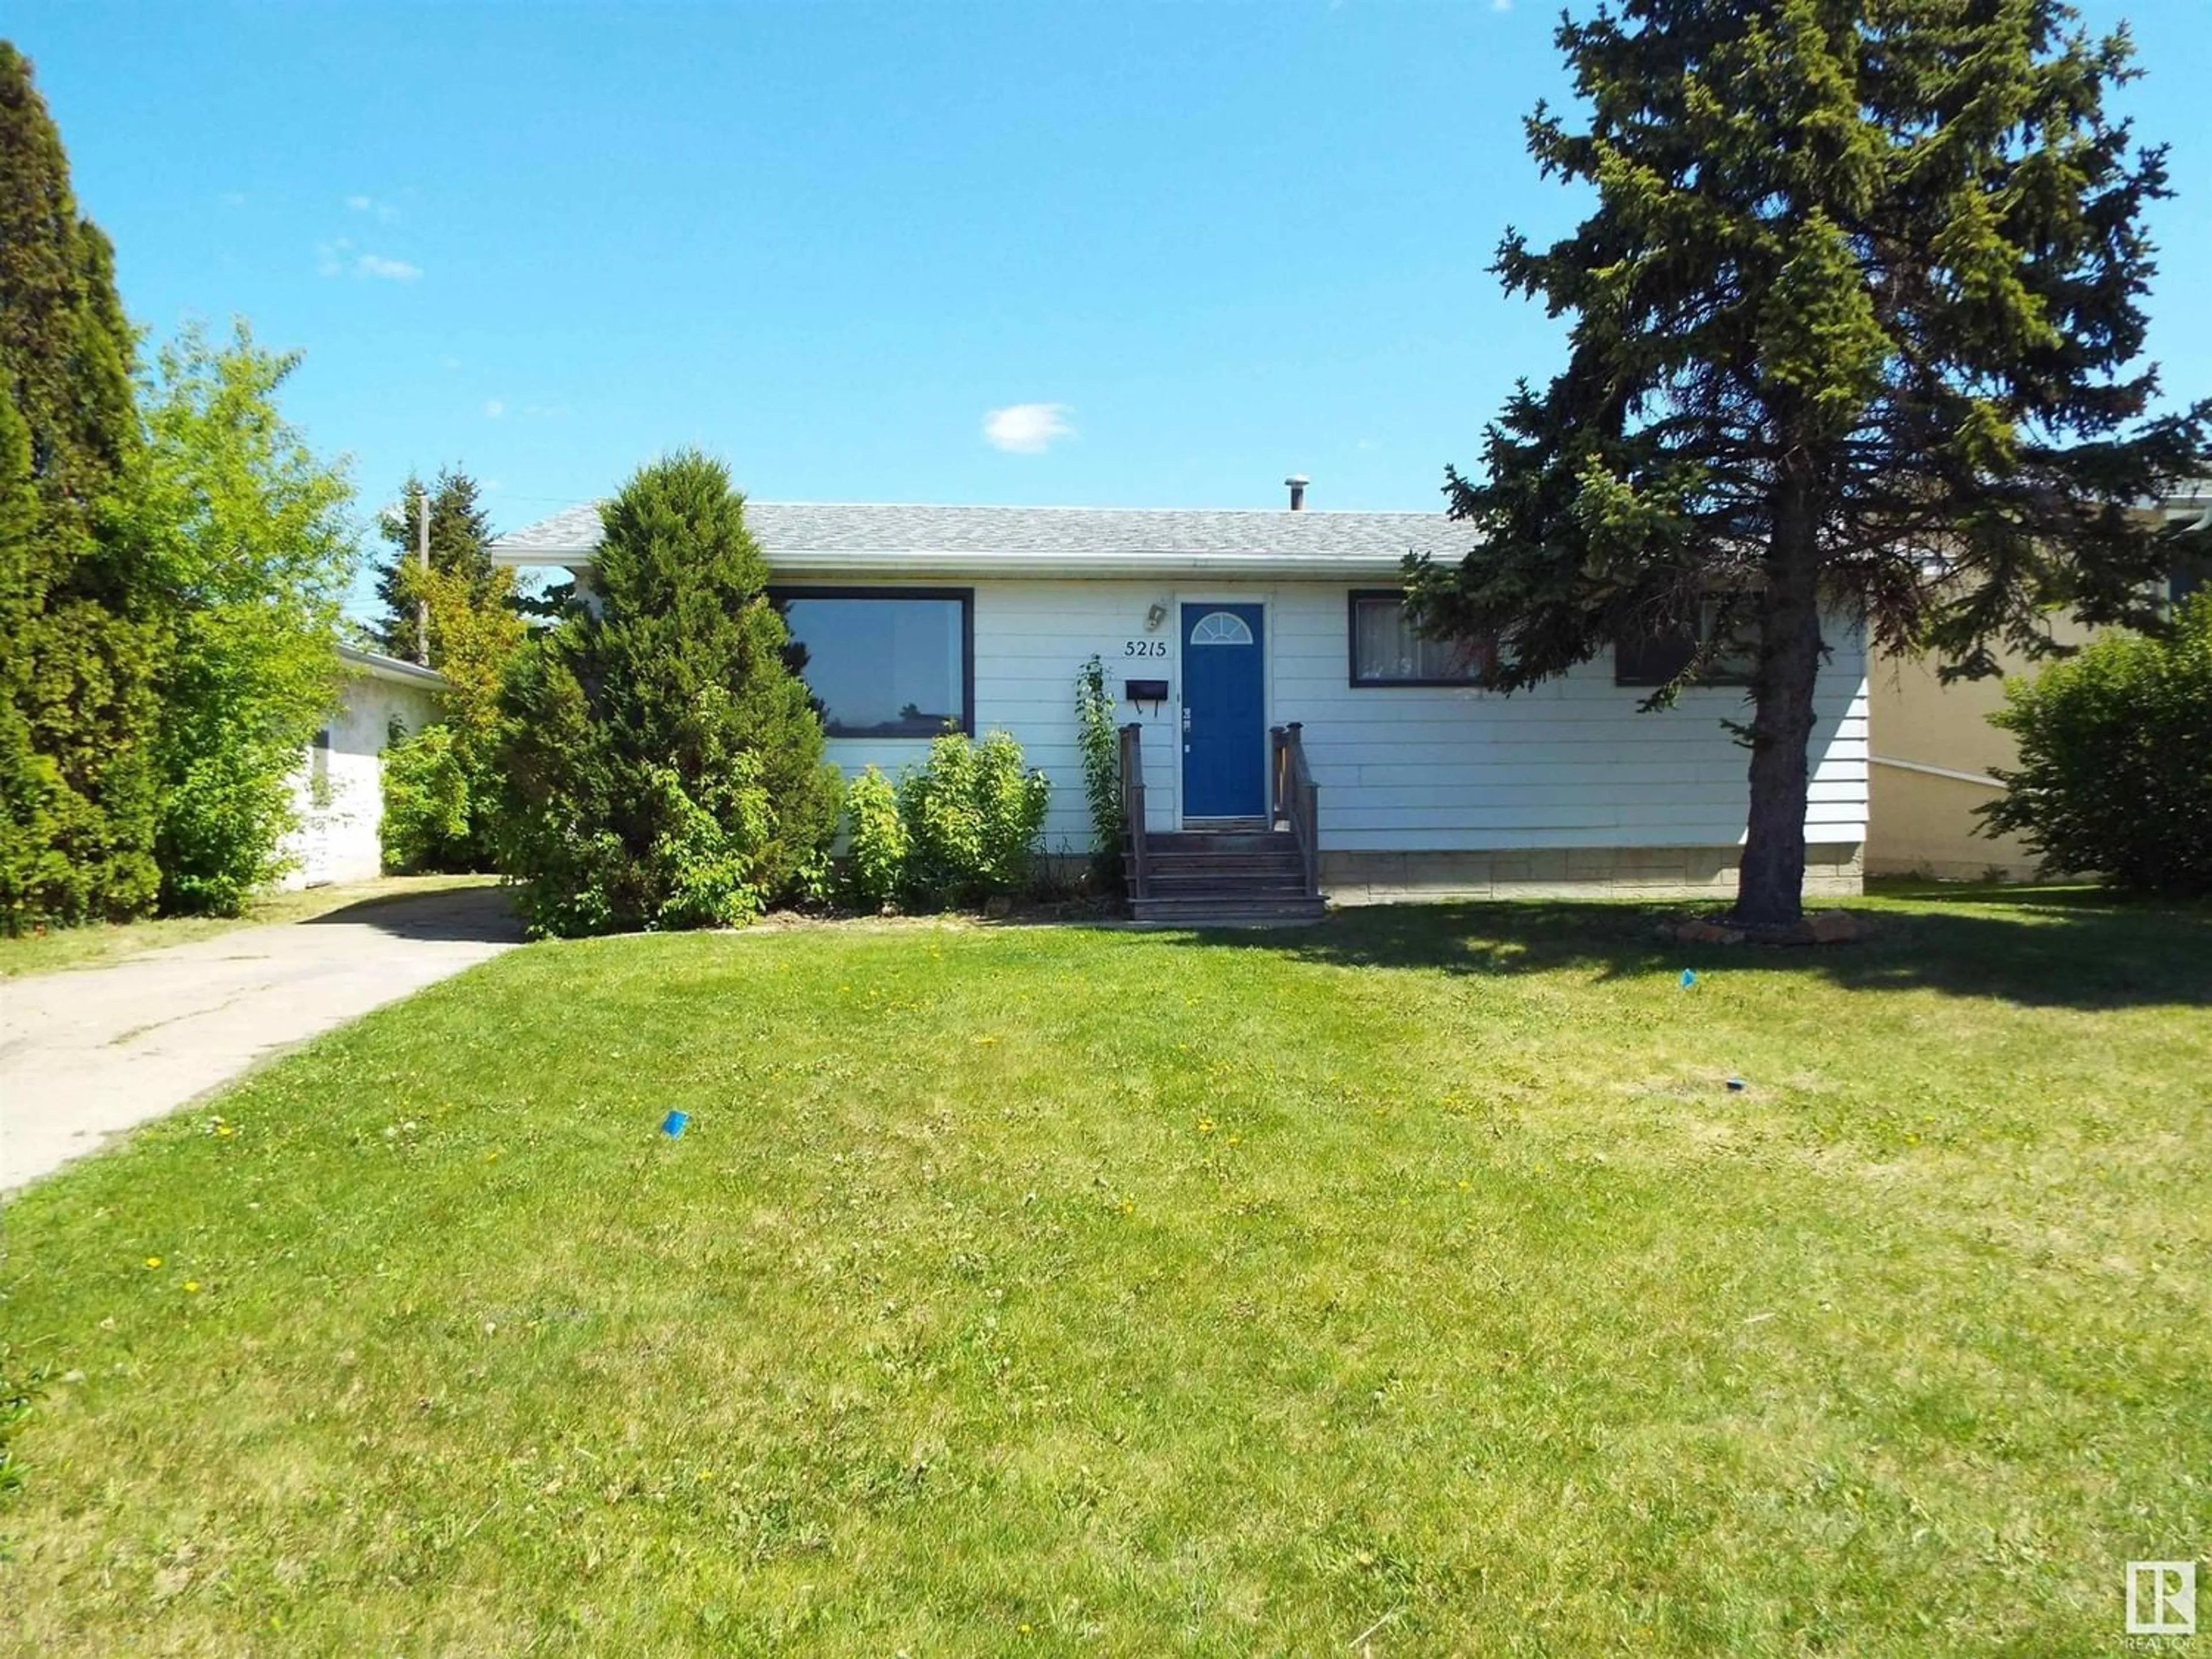 Frontside or backside of a home for 5215 52 ST, Leduc Alberta T9E5L9